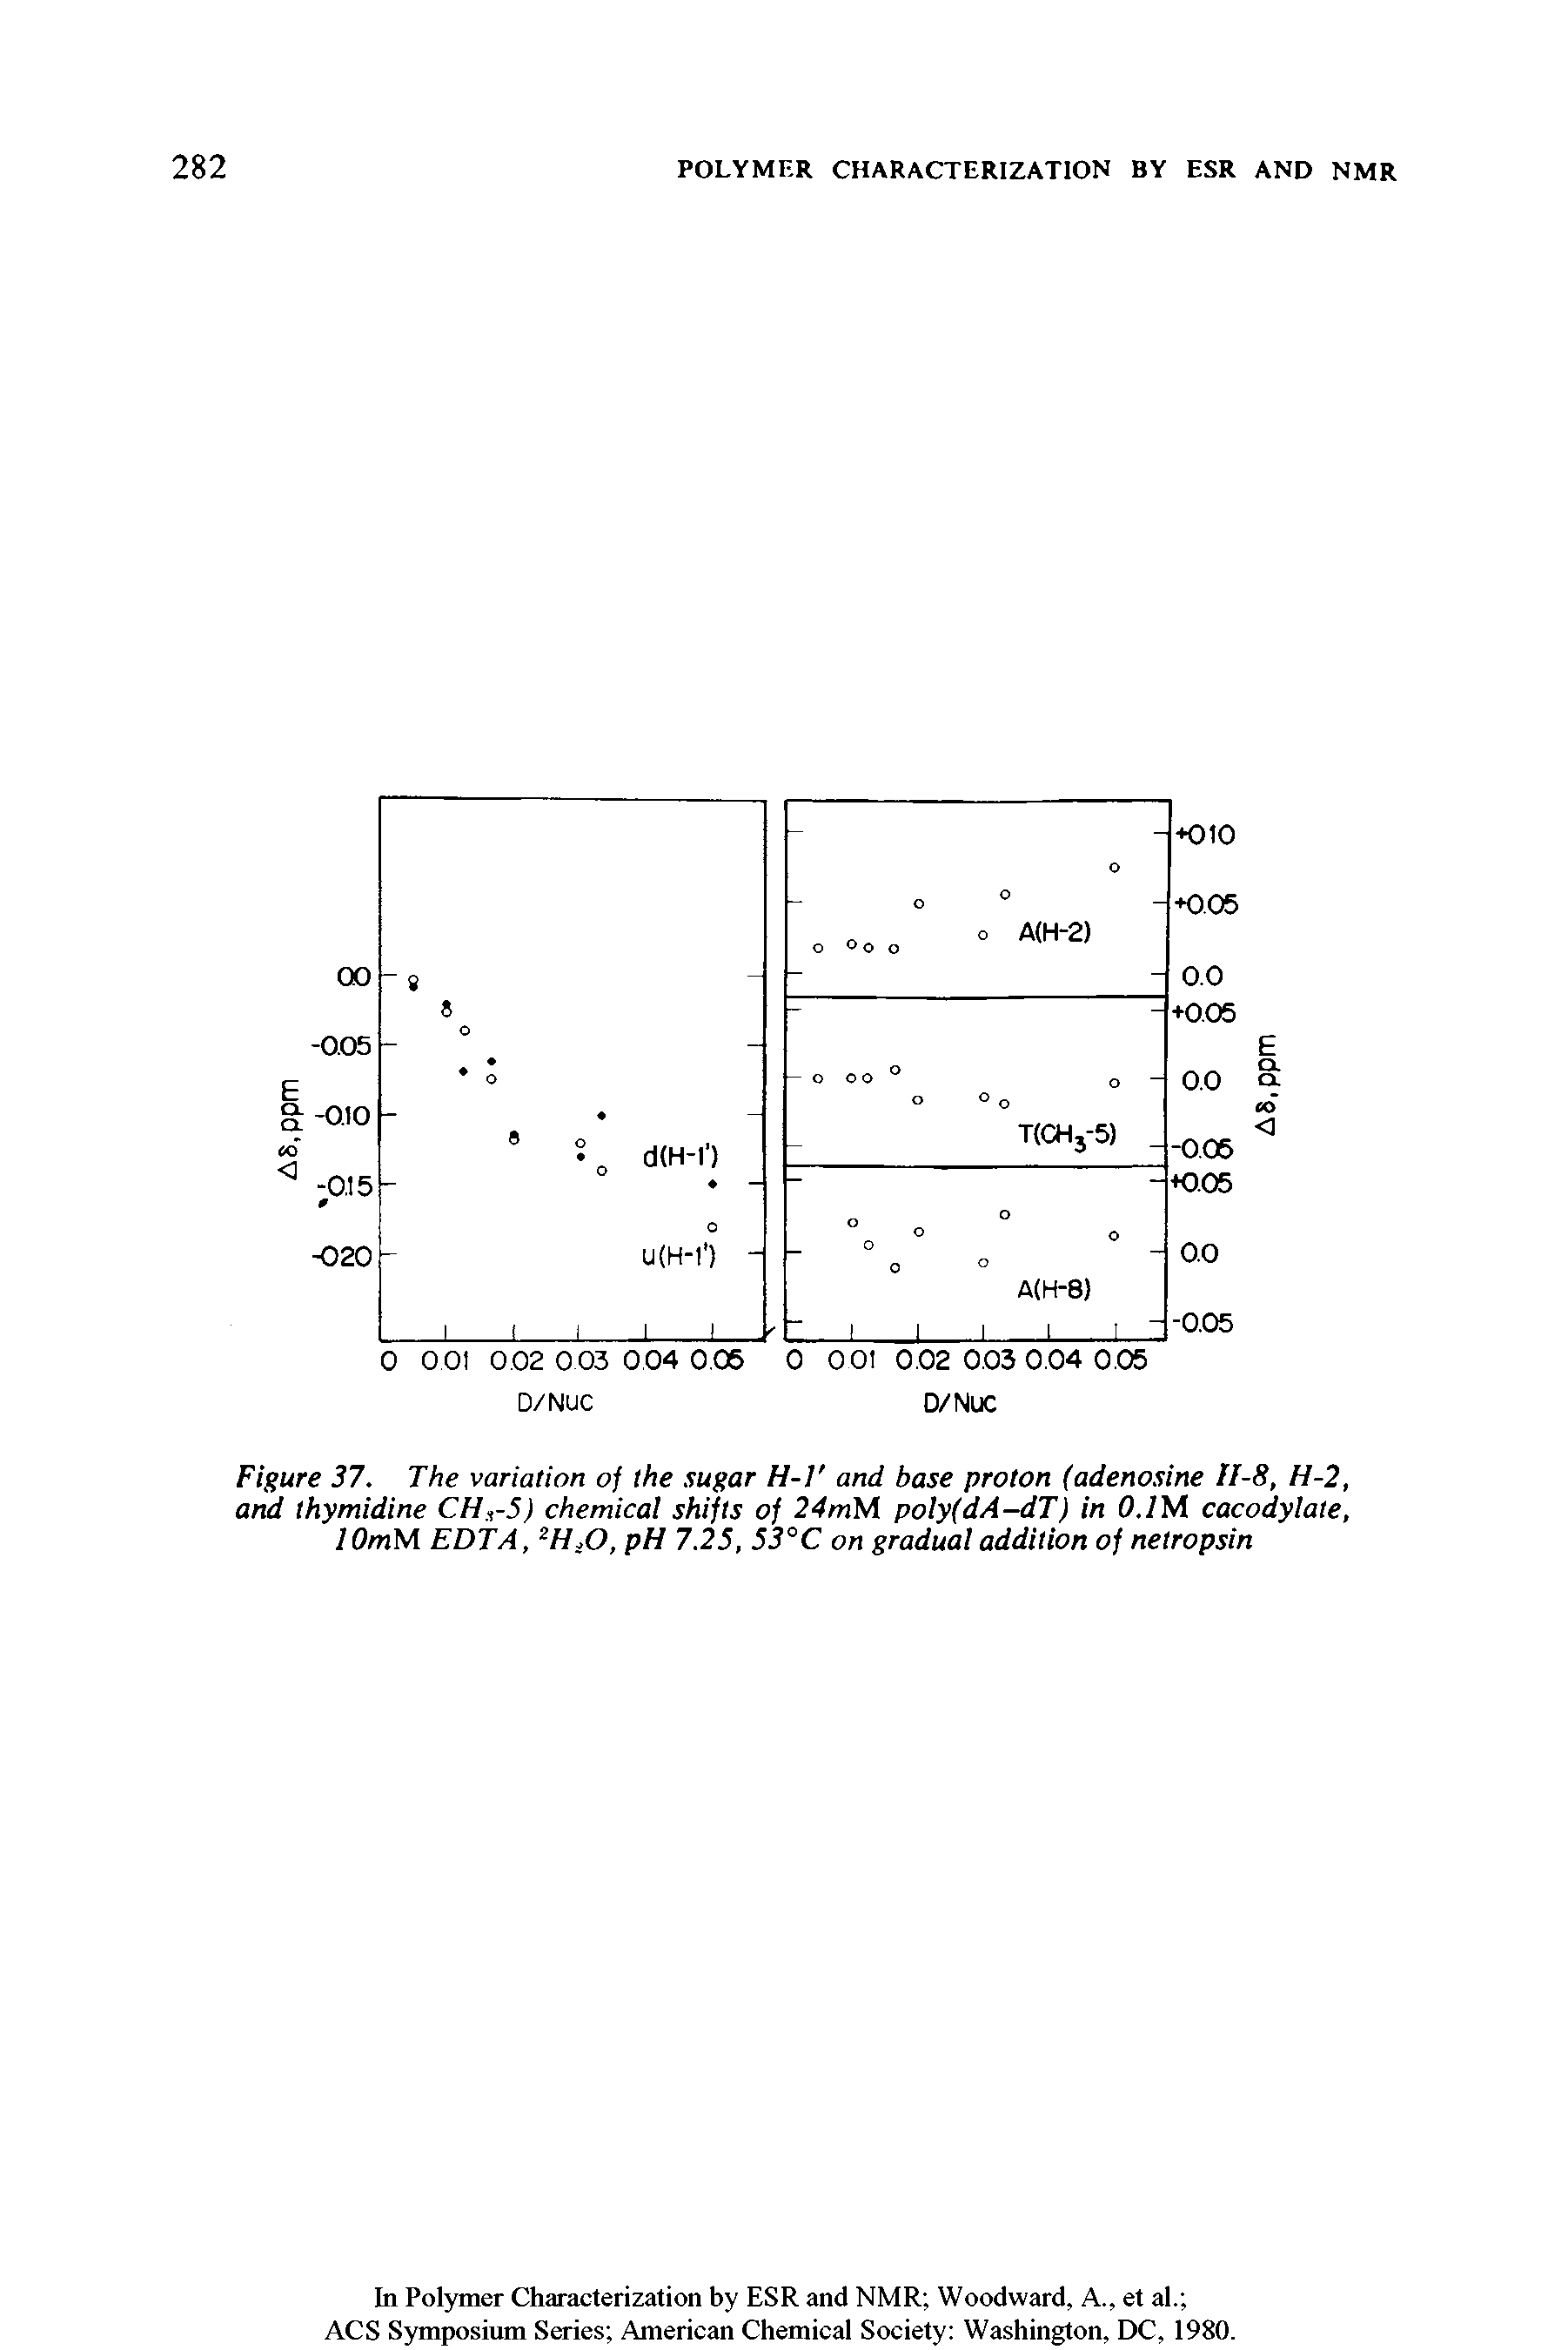 Figure 37. The variation of the sugar H-l and base proton (adenosine II-8, H-2, and thymidine CH t-5) chemical shifts of 24mM poty(dA-dT) in 0.1 M cacodyiate, lOmM EDTA, 2HiO, pH 7.25, 53°C on gradual addition of netropsin...